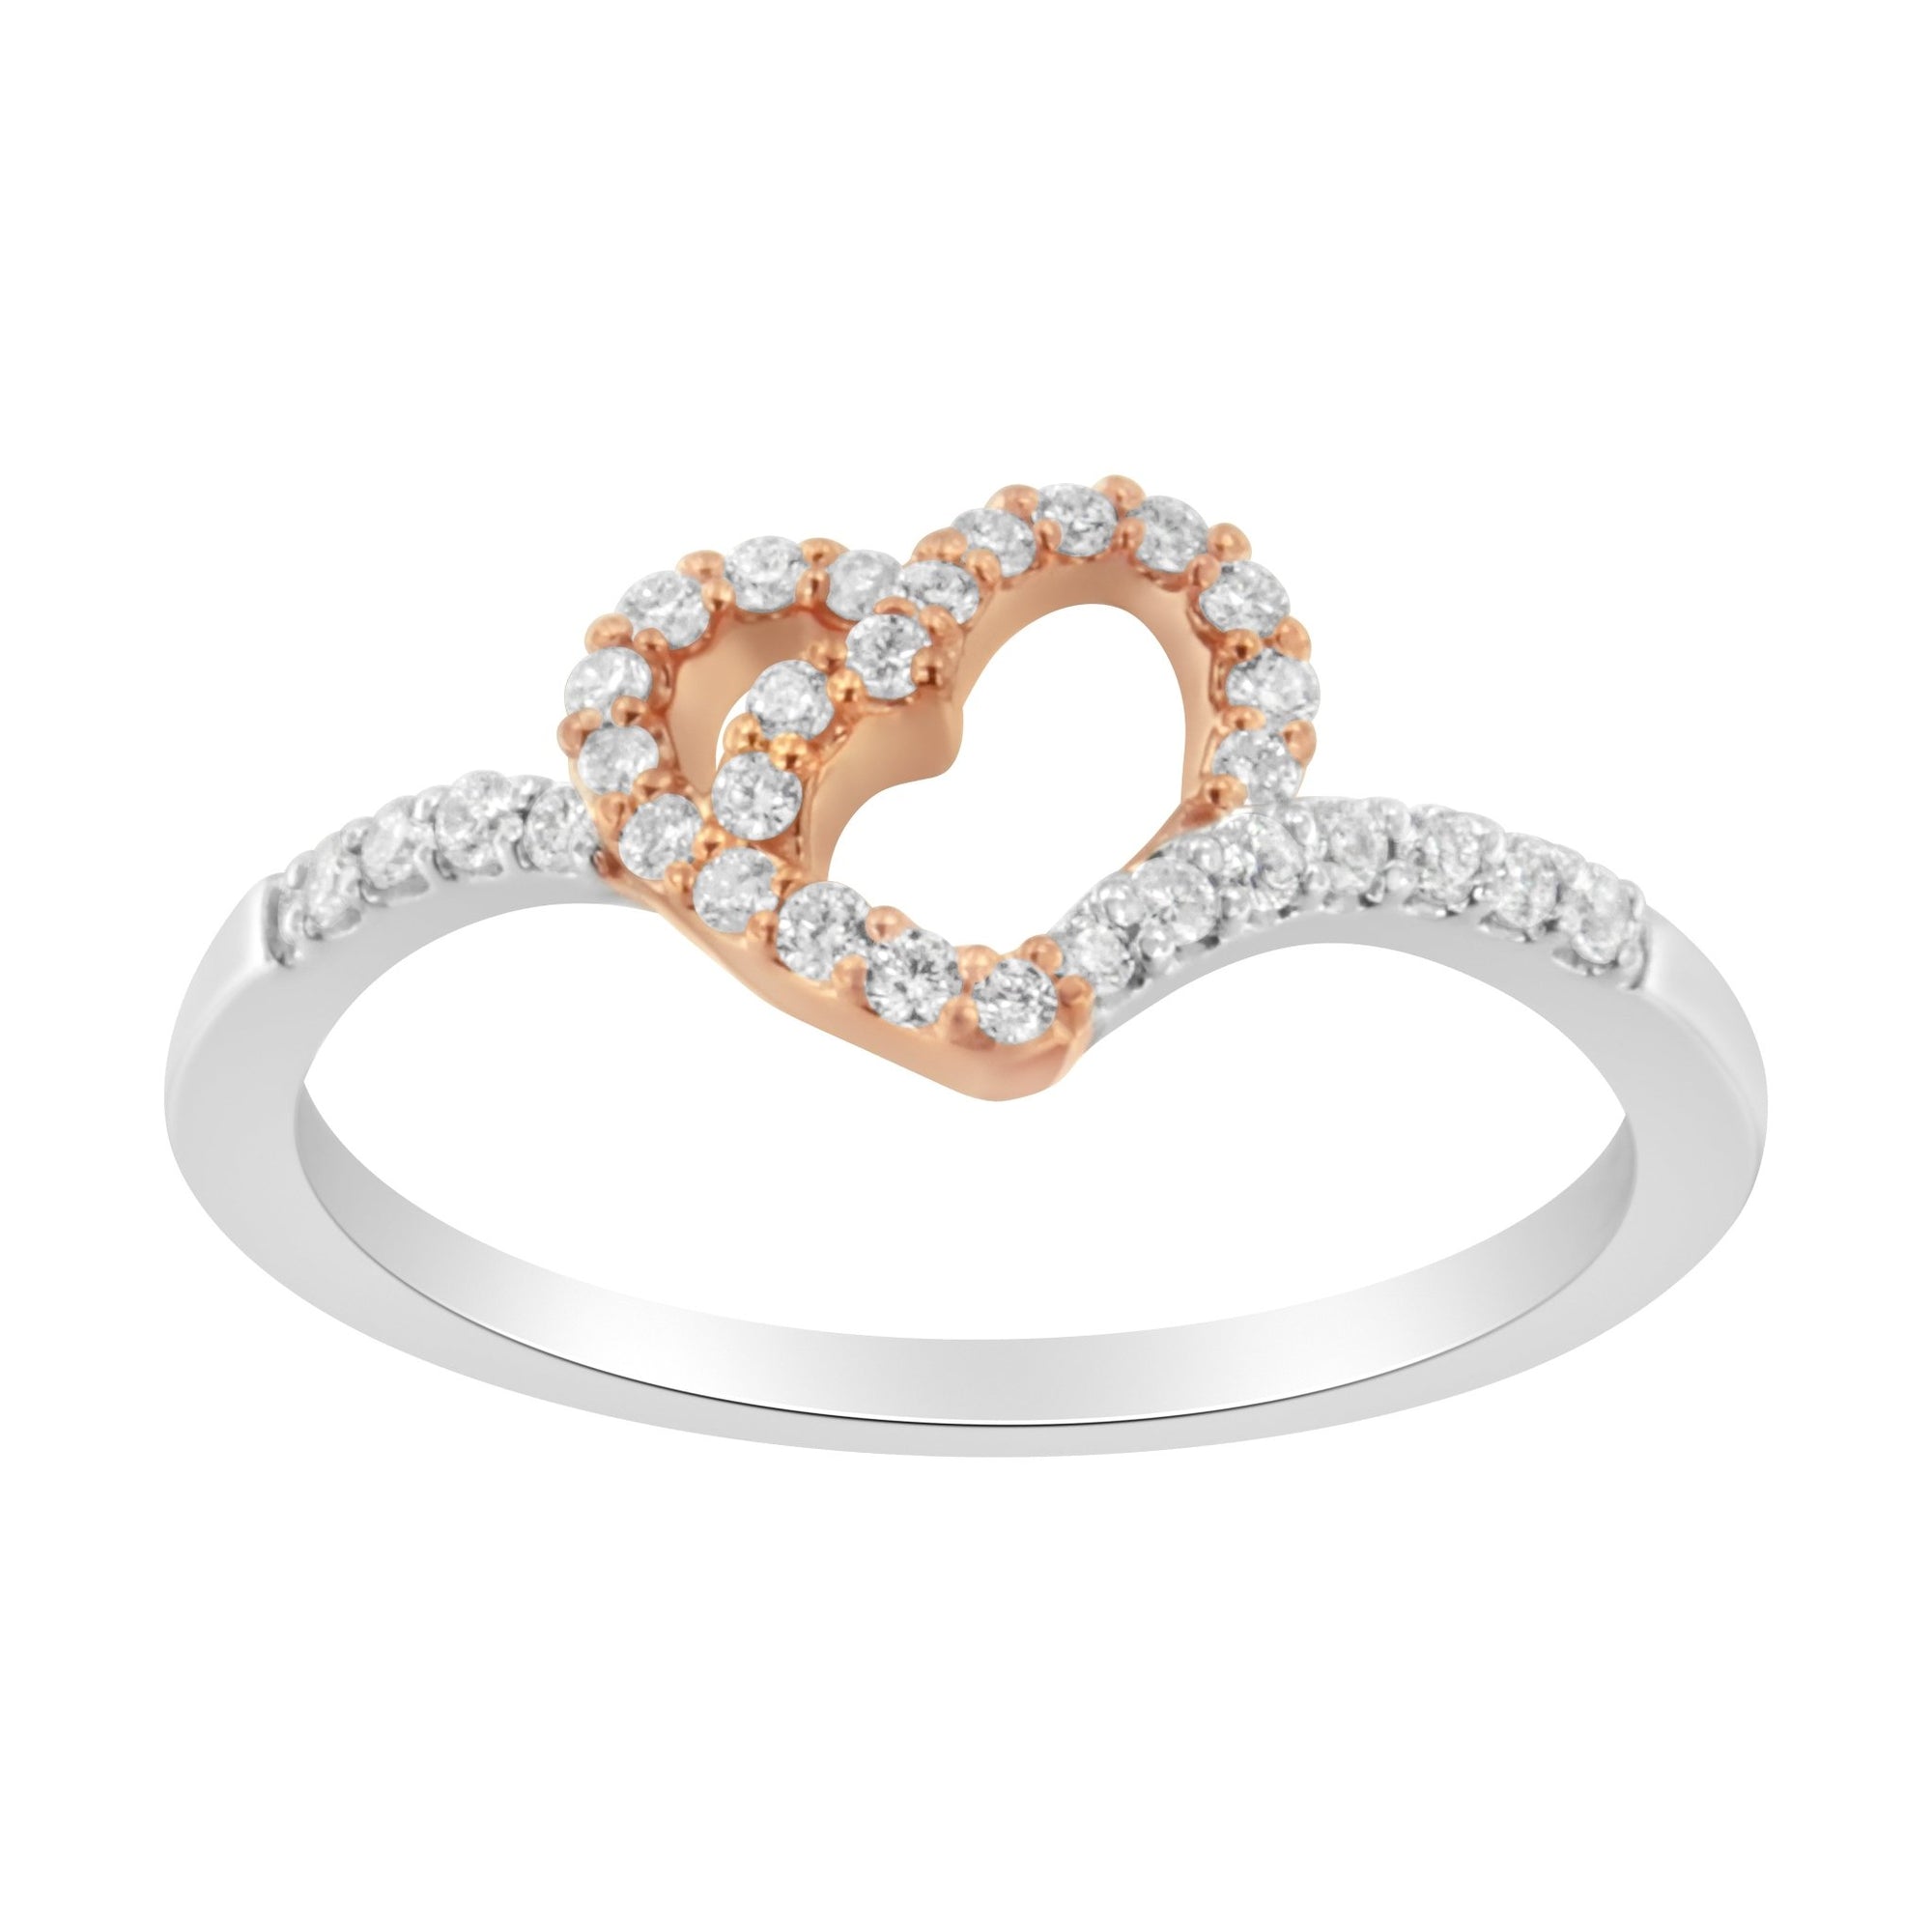 10K Two Toned Gold Diamond Heart Cocktail Ring (1/5 Cttw, H-I Color, I1-I2 Clarity) - Size 6-1/2 - LinkagejewelrydesignLinkagejewelrydesign